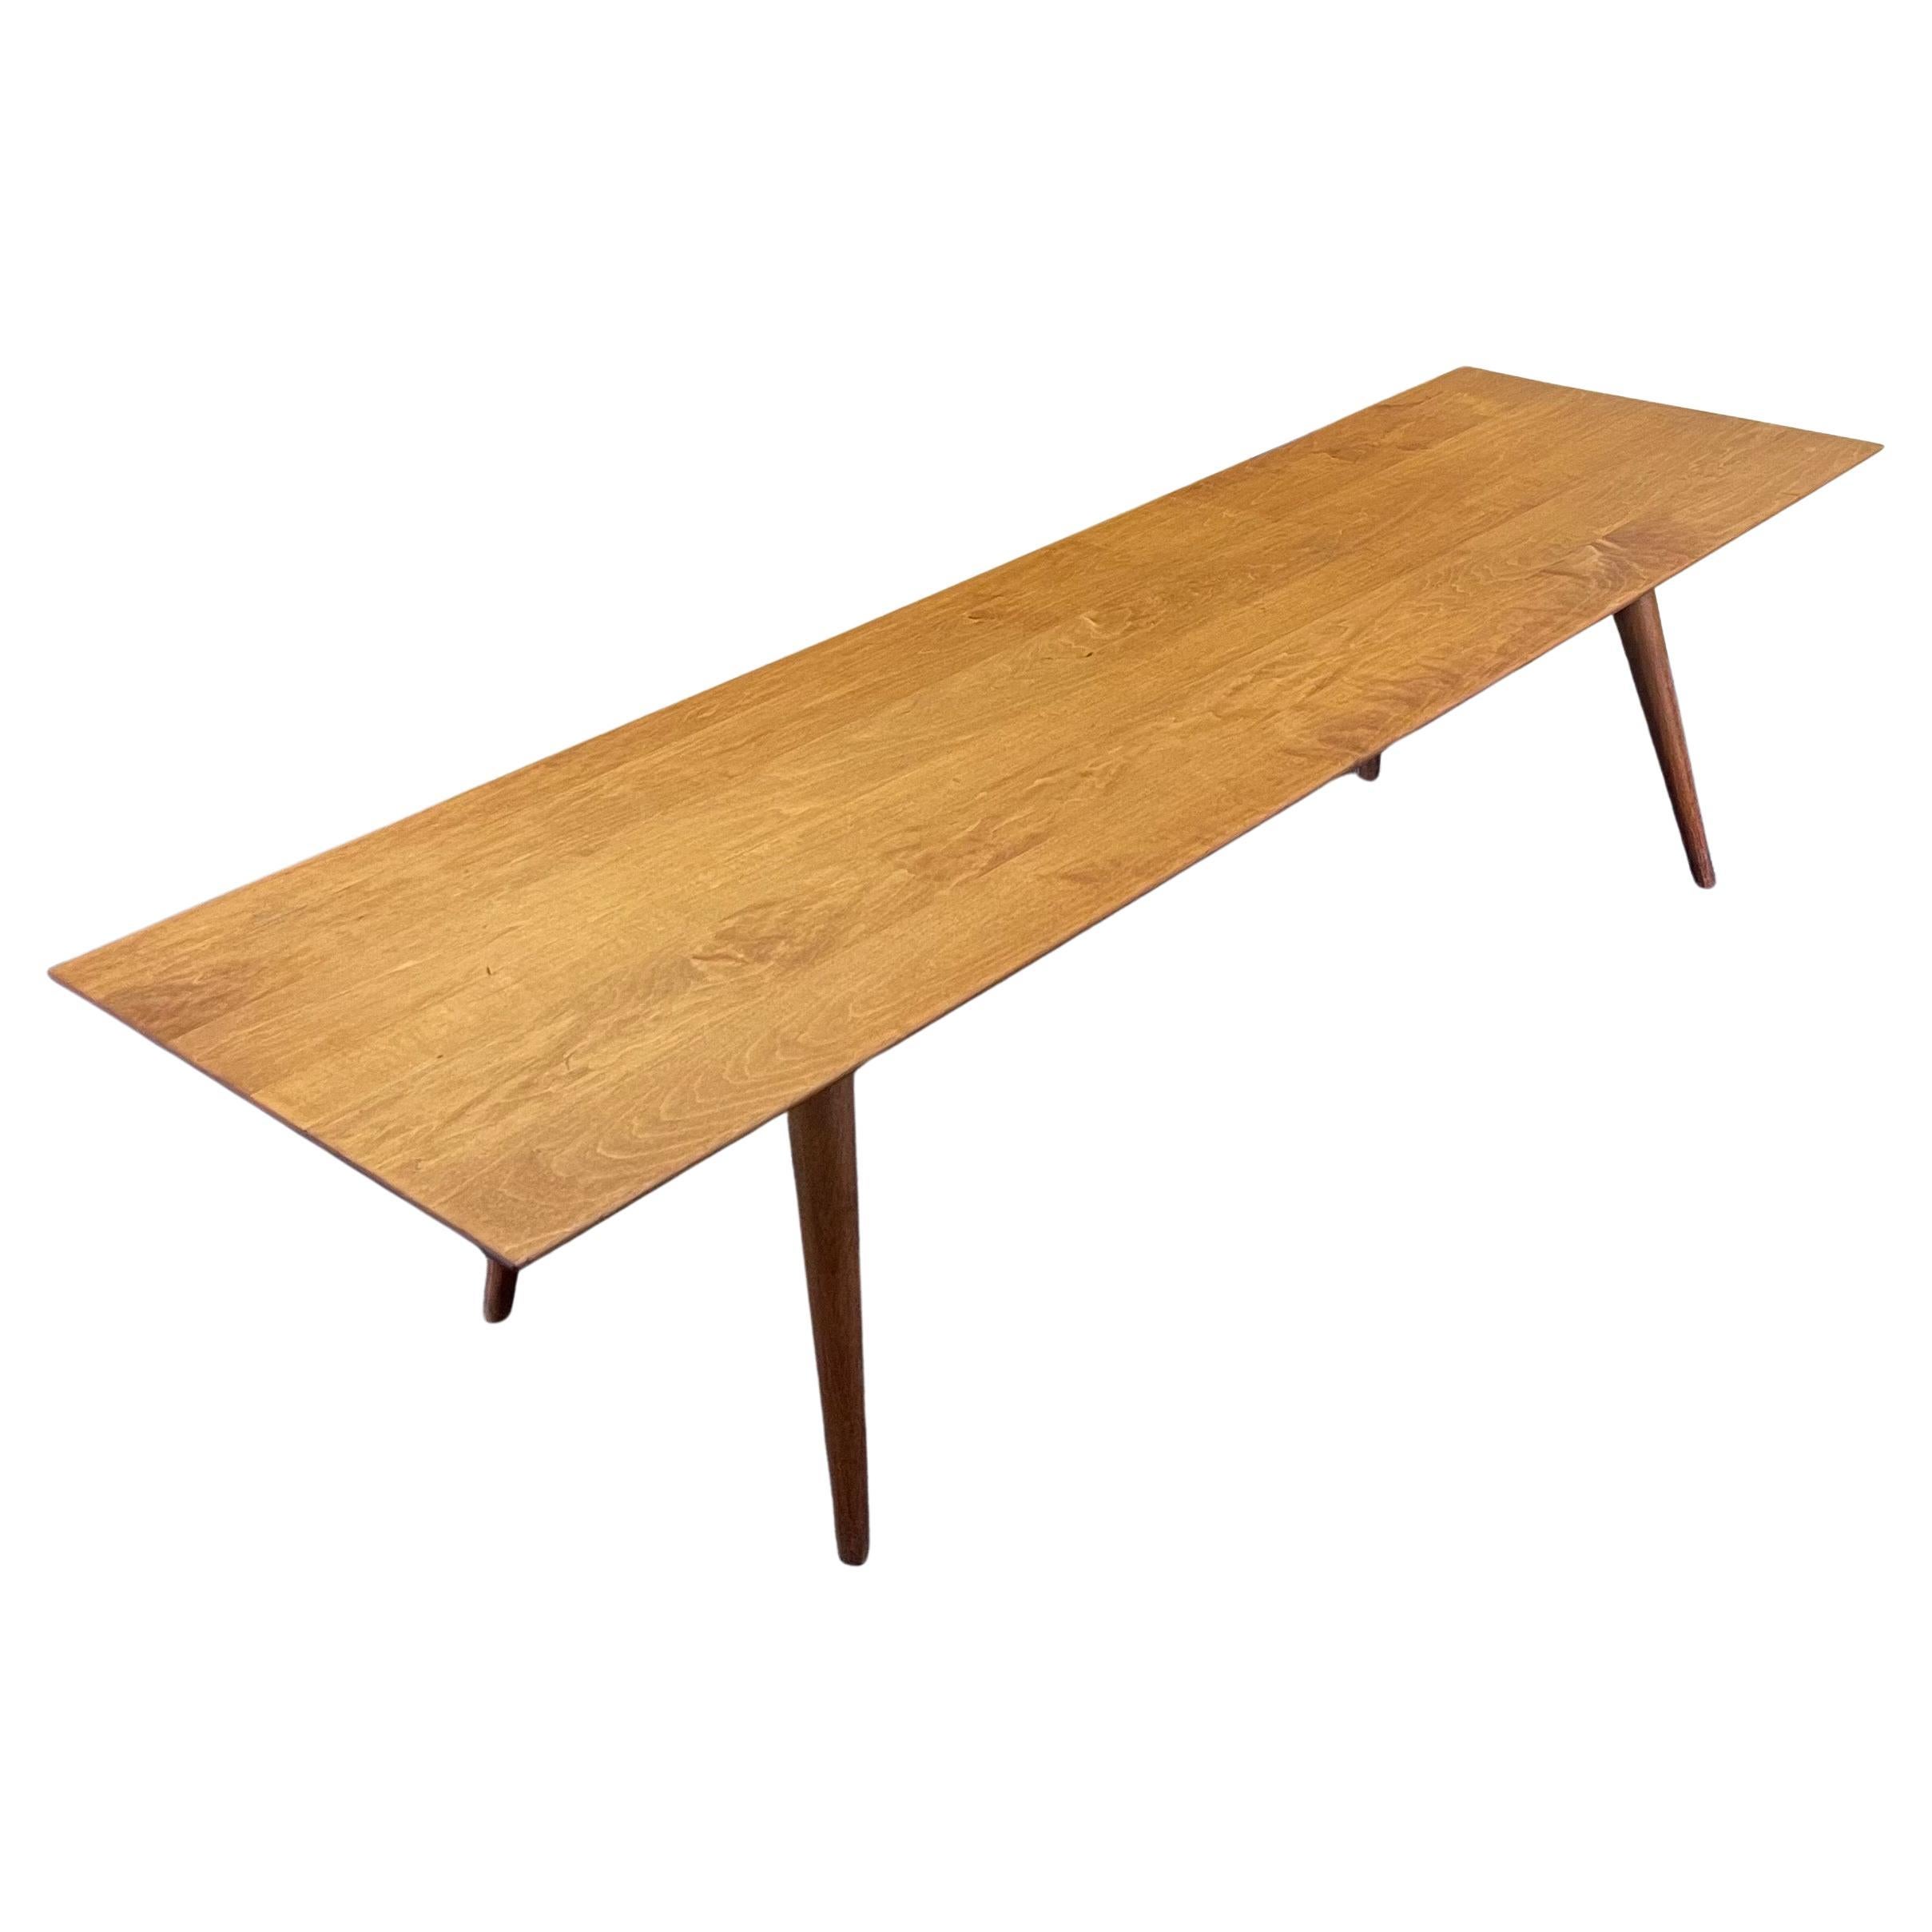 Gorgeous mid-century modern low profile coffee table by Paul Mc Cobb for The Planner Group, original finish in light walnut stain the table its in original condition, some wear due to age overall very clean for its age retains label, will remove